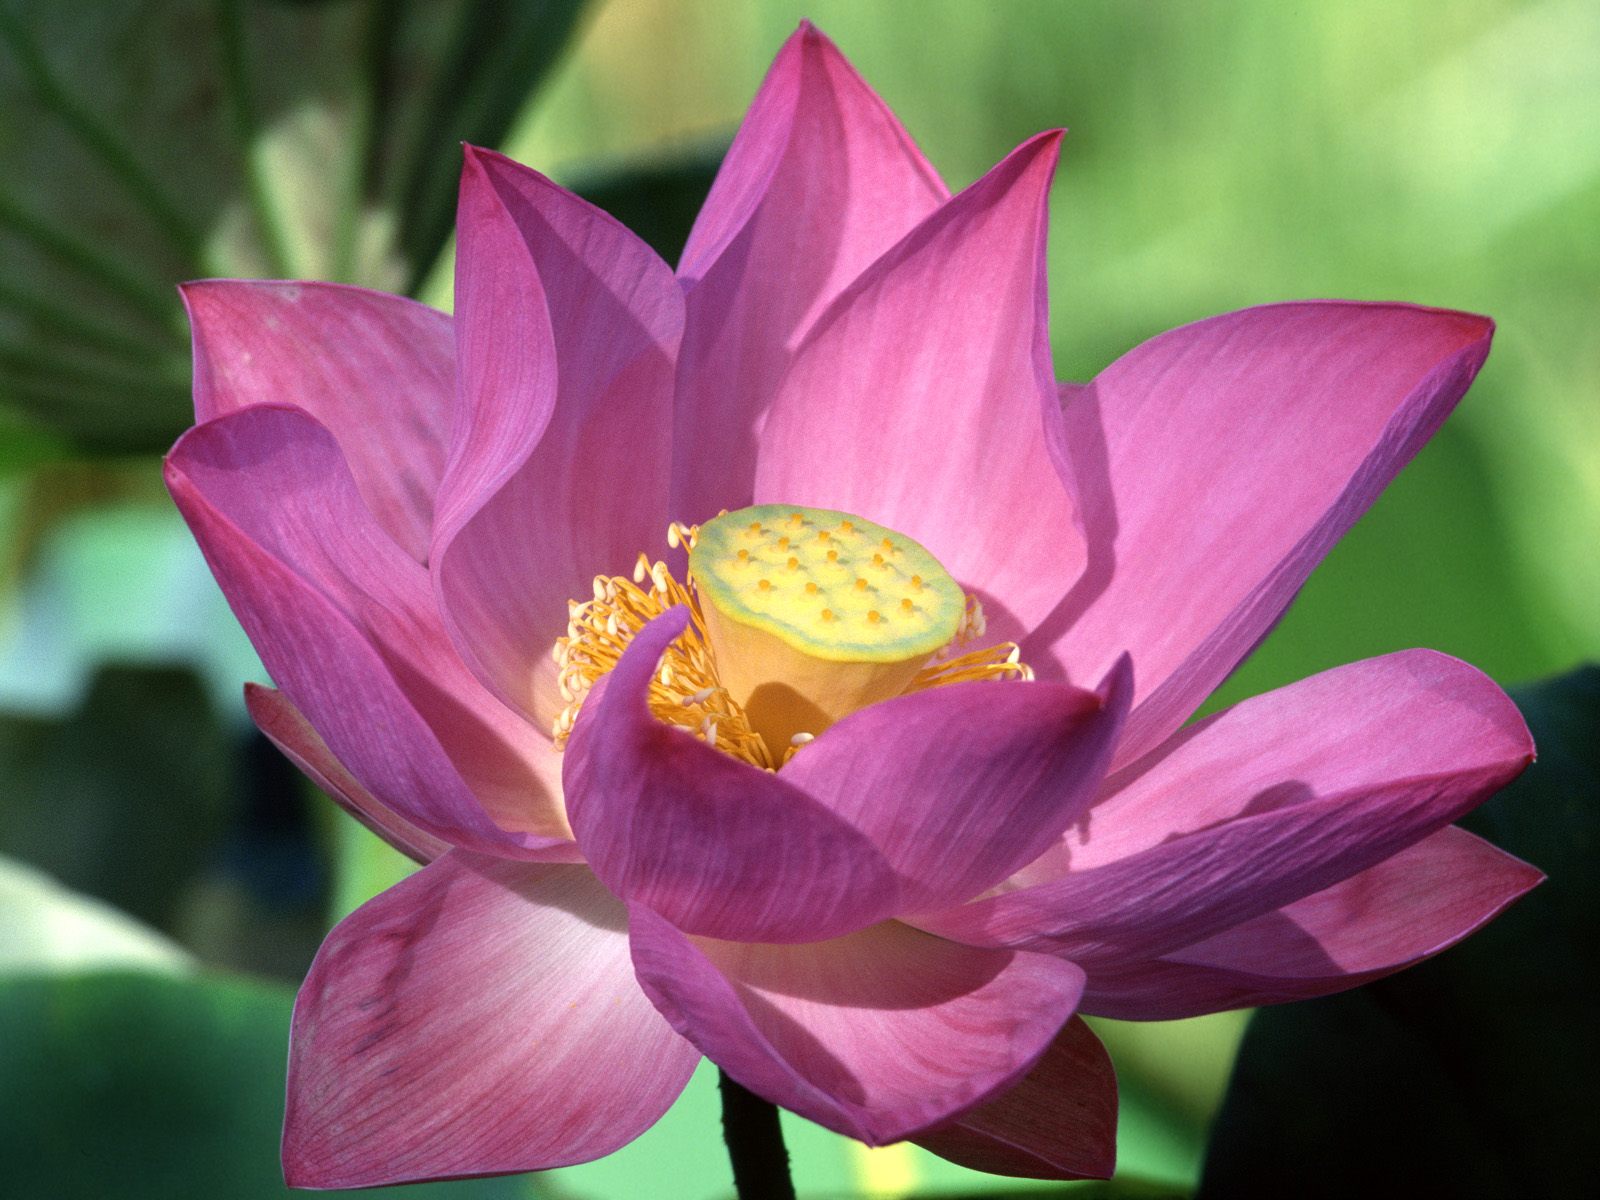 The Meaning and Symbolism of the Lotus Plant